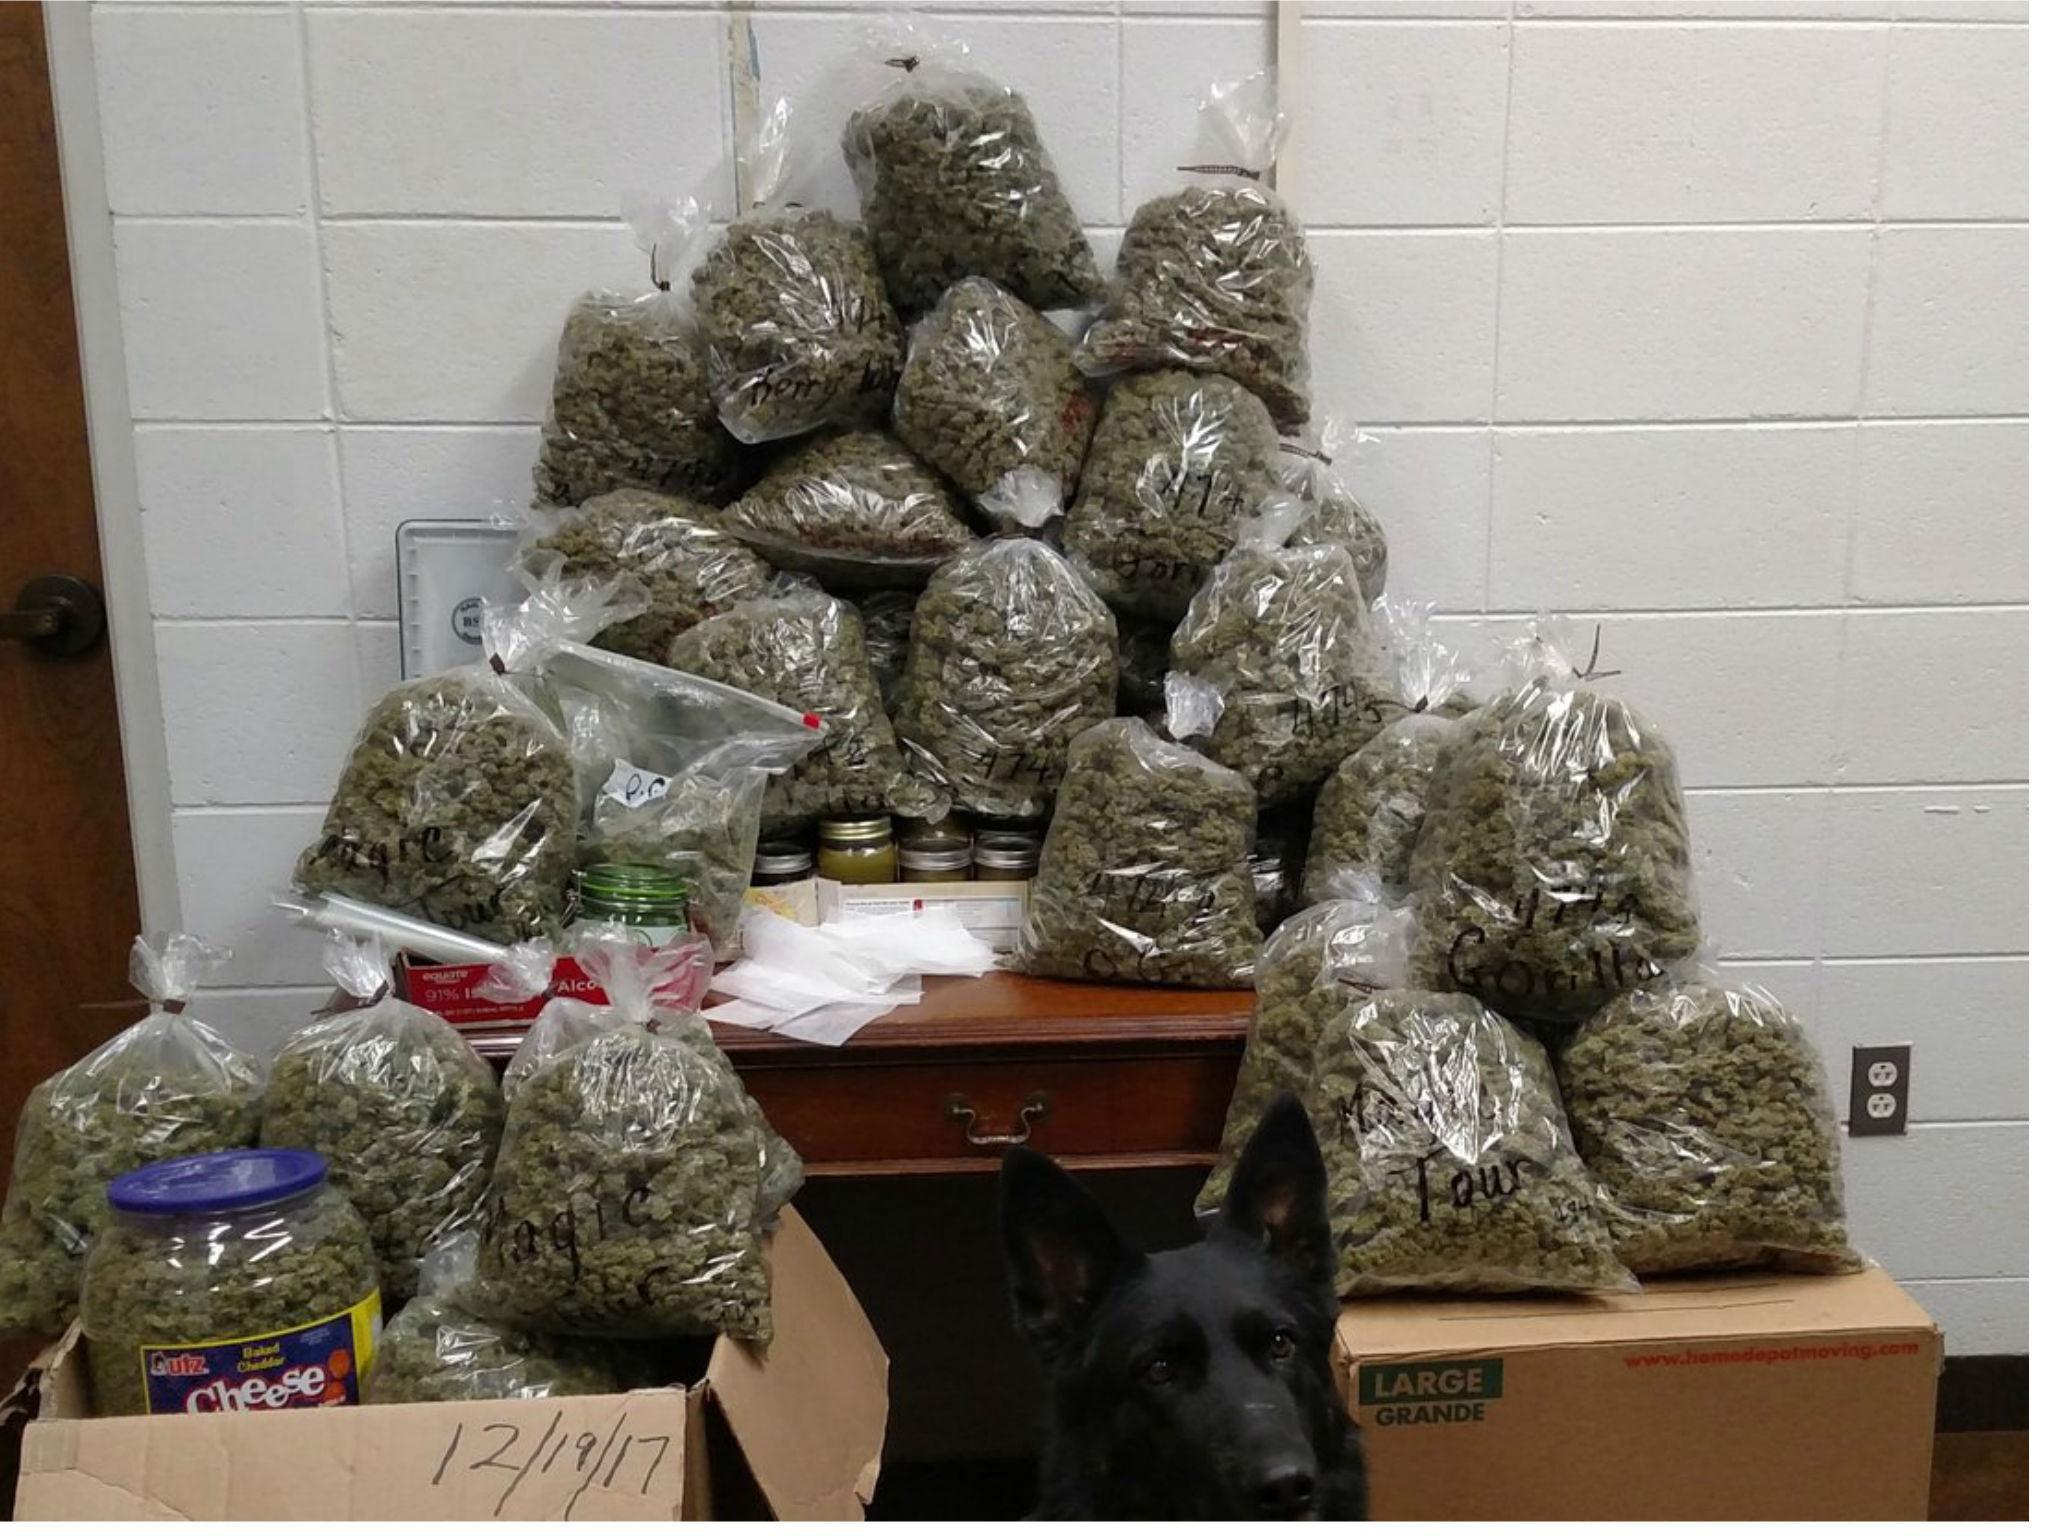 Officers pulled over an elderly couple who said the weed was for presents